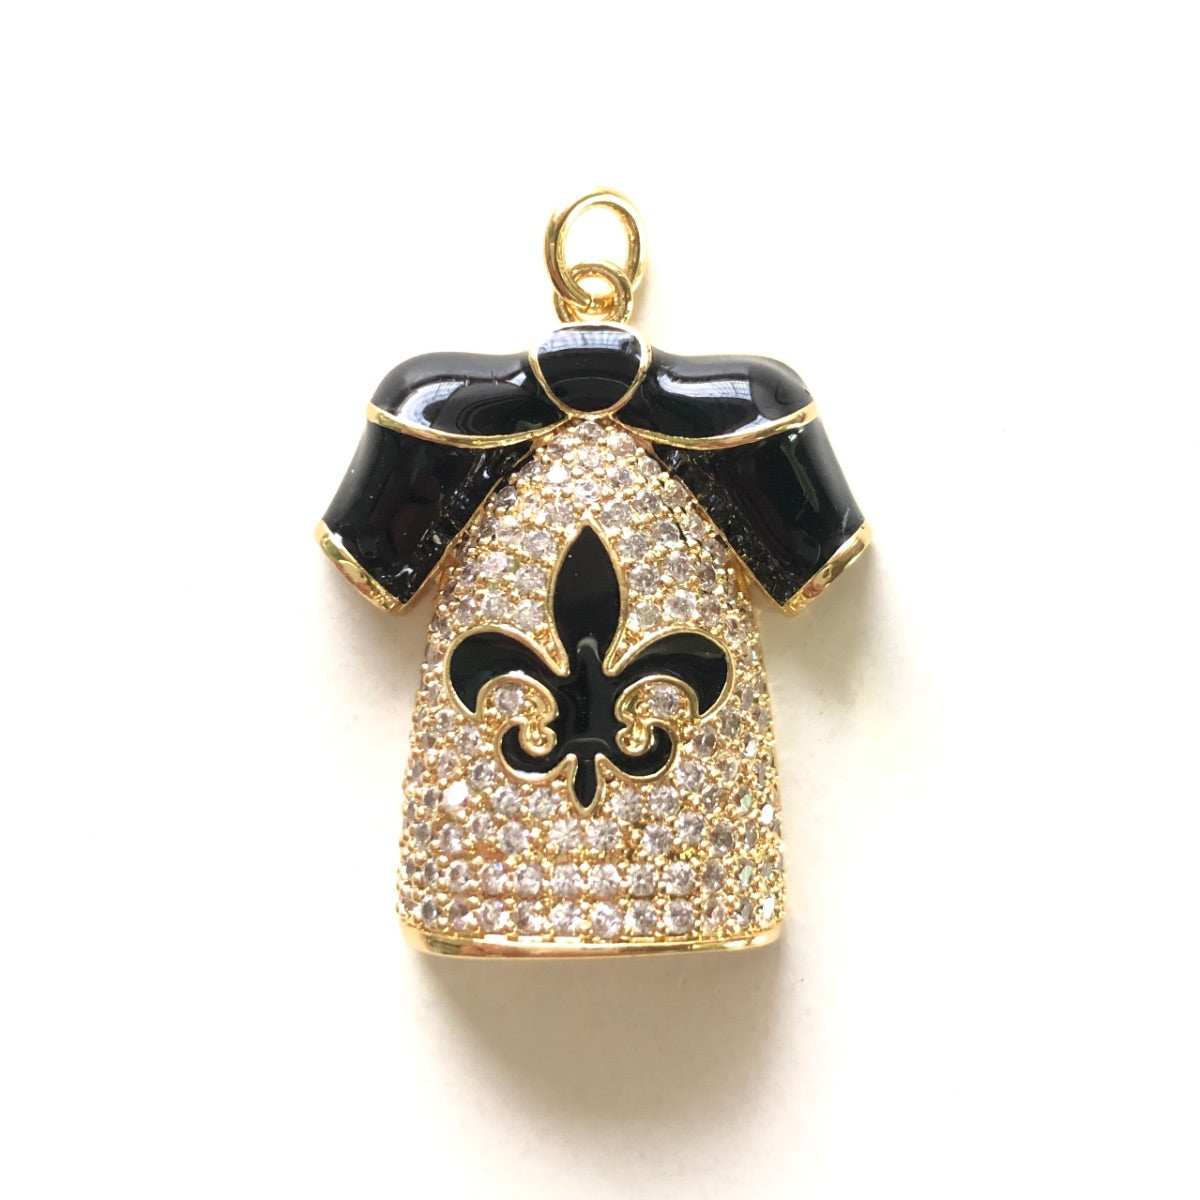 10pcs/lot 33*27mm Fleur De Lis CZ Saints Football Uniform Suit Jersey Charms Gold CZ Paved Charms American Football Sports Louisiana Inspired New Charms Arrivals Charms Beads Beyond